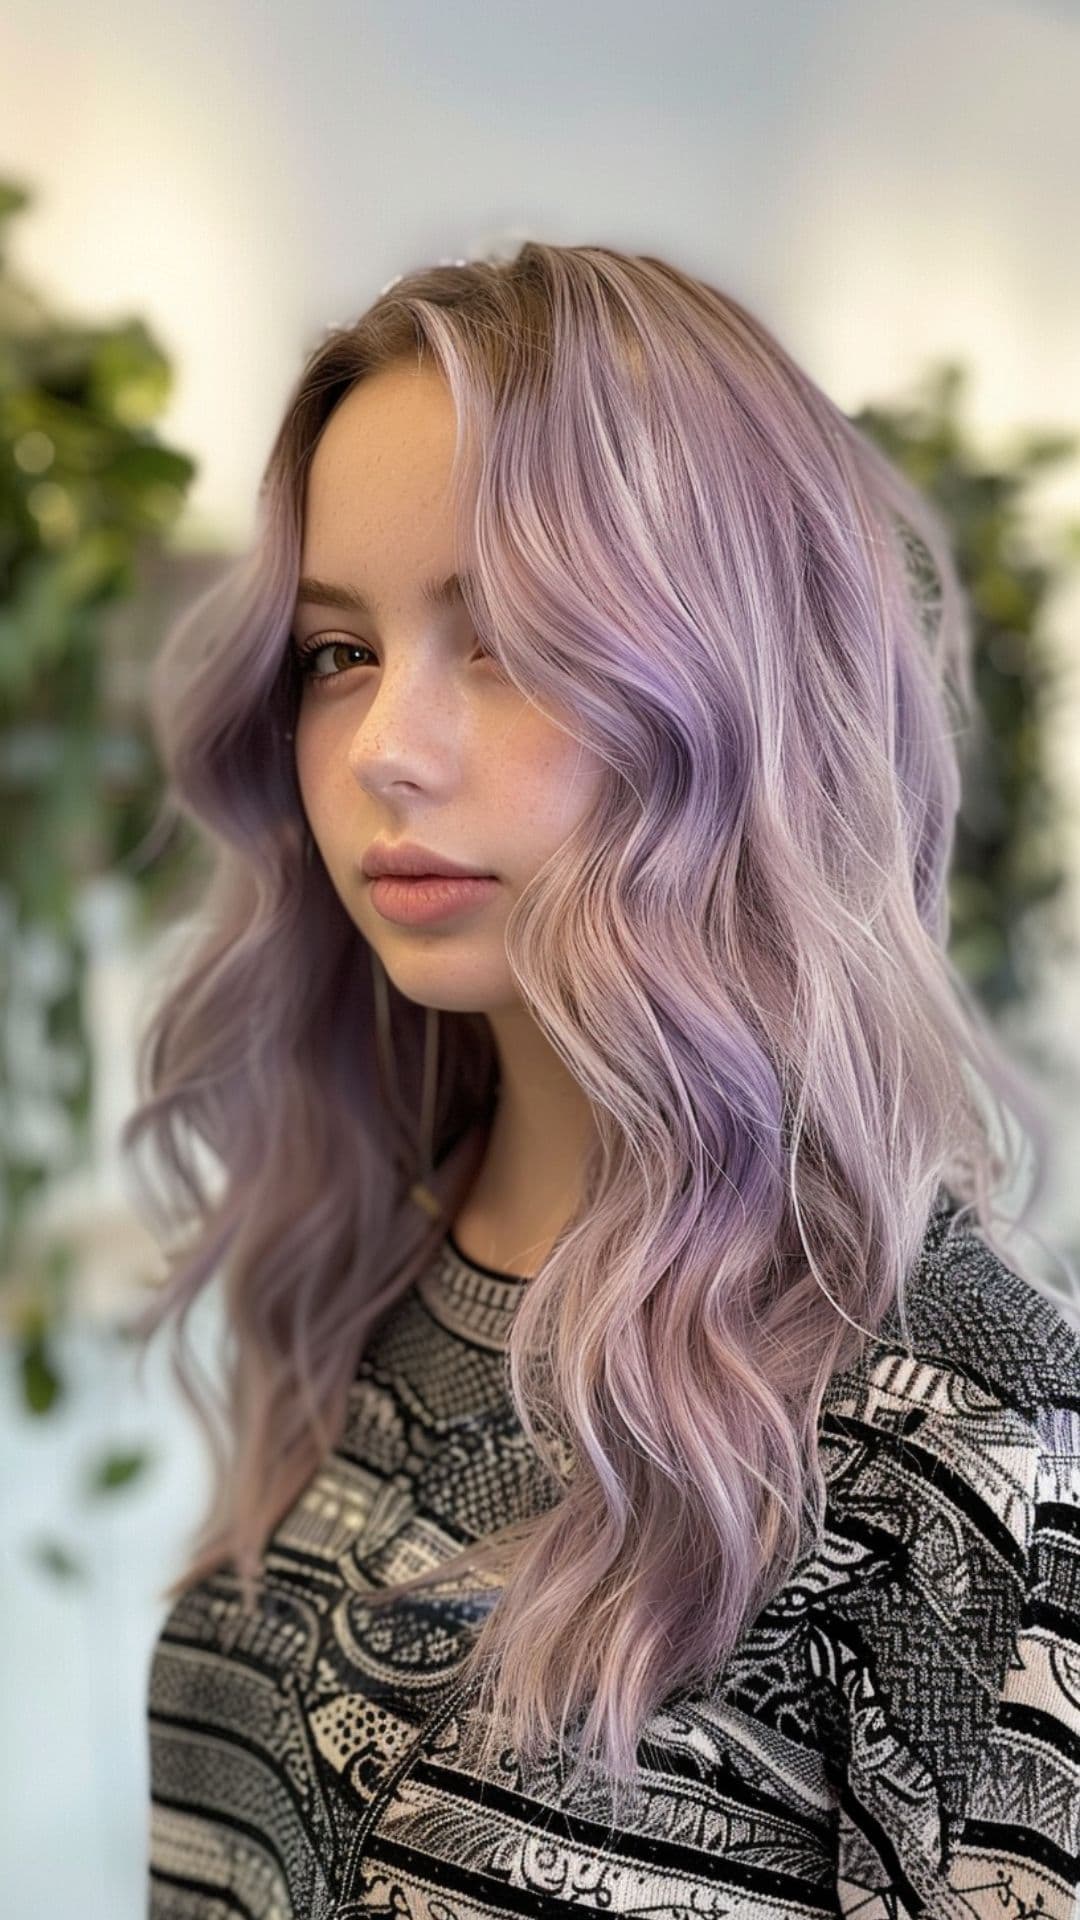 A young woman modelling a smokey lilac hair.